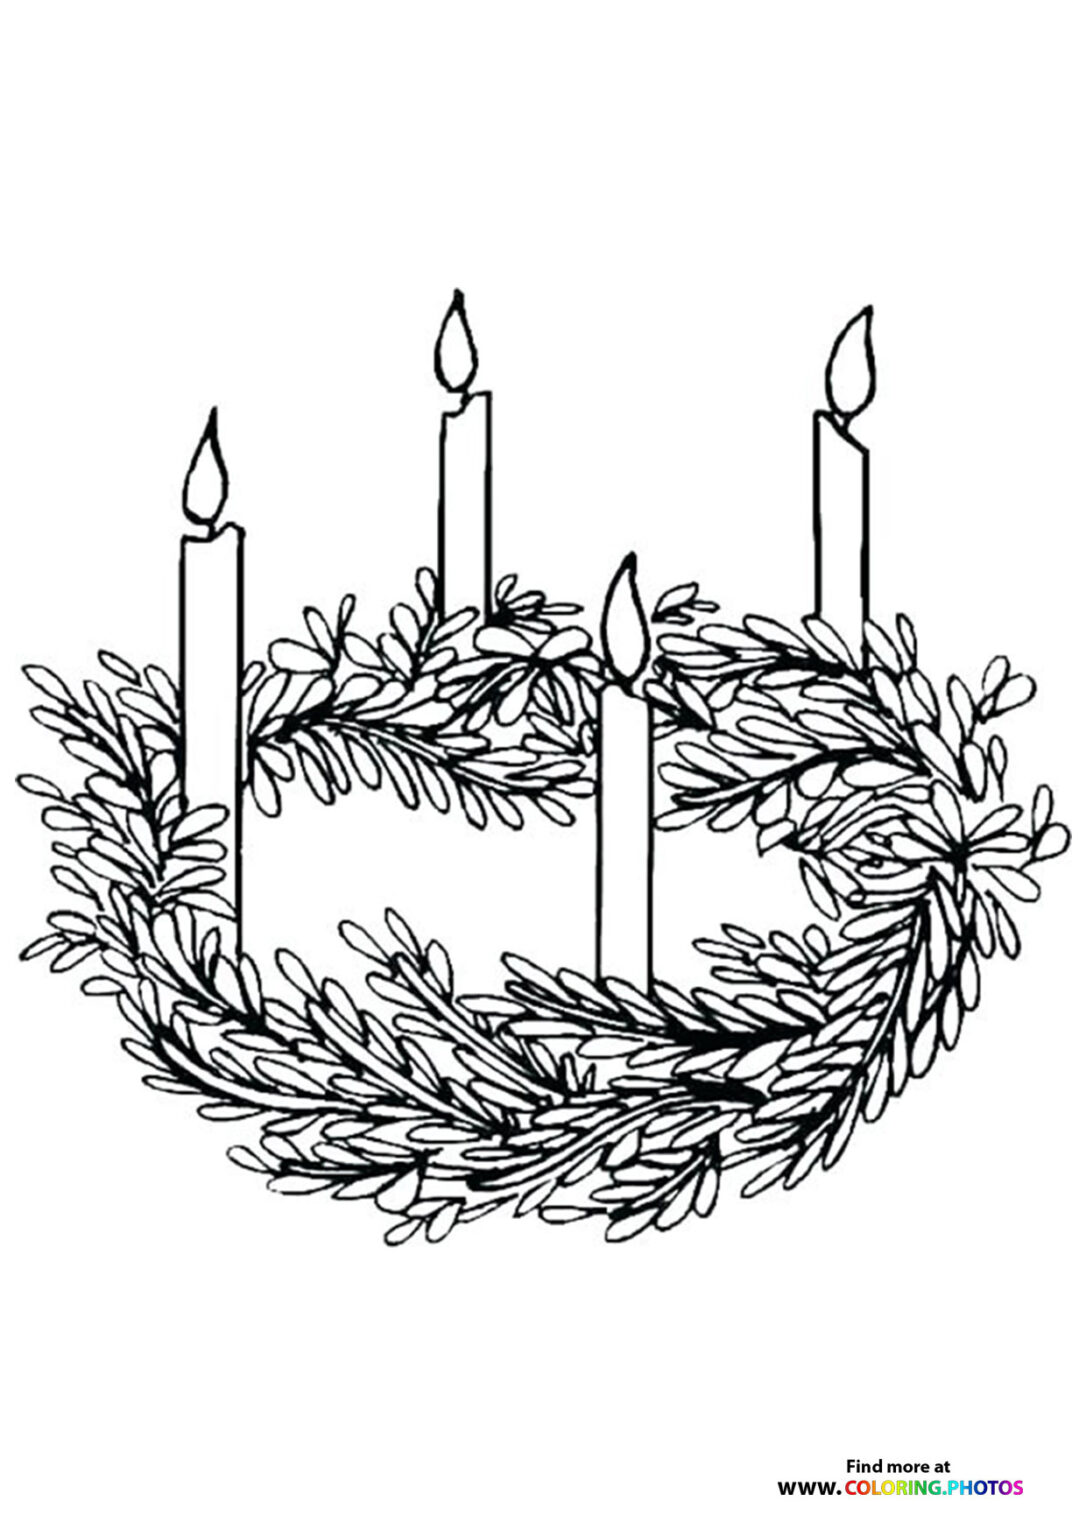 Advent Wreath - Coloring Pages for kids | Free and easy pritables